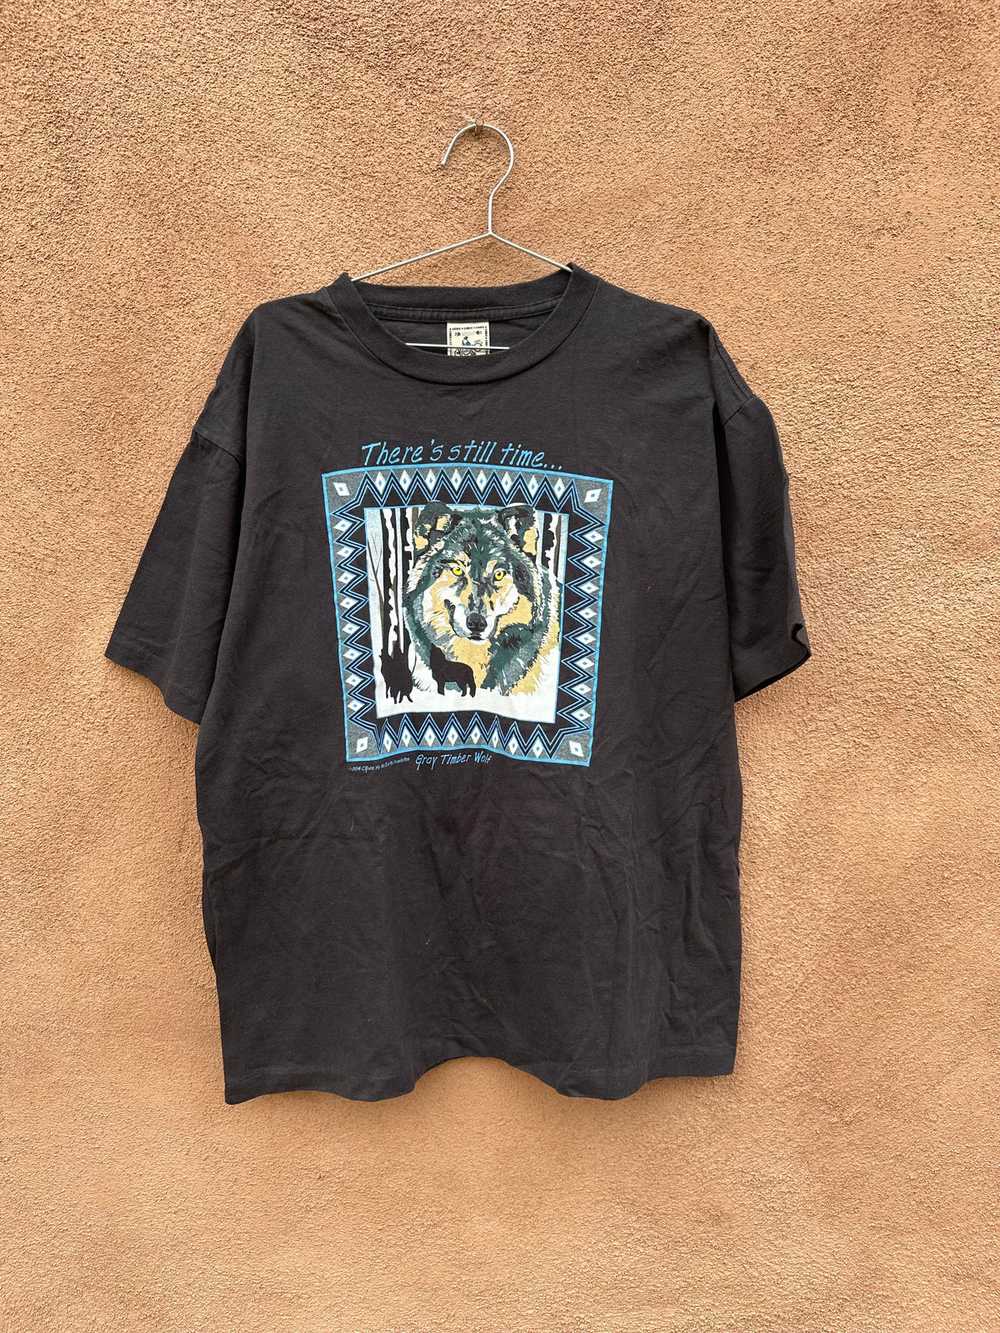 1994 There's Still Time - Save the Wolves T-shirt - image 1